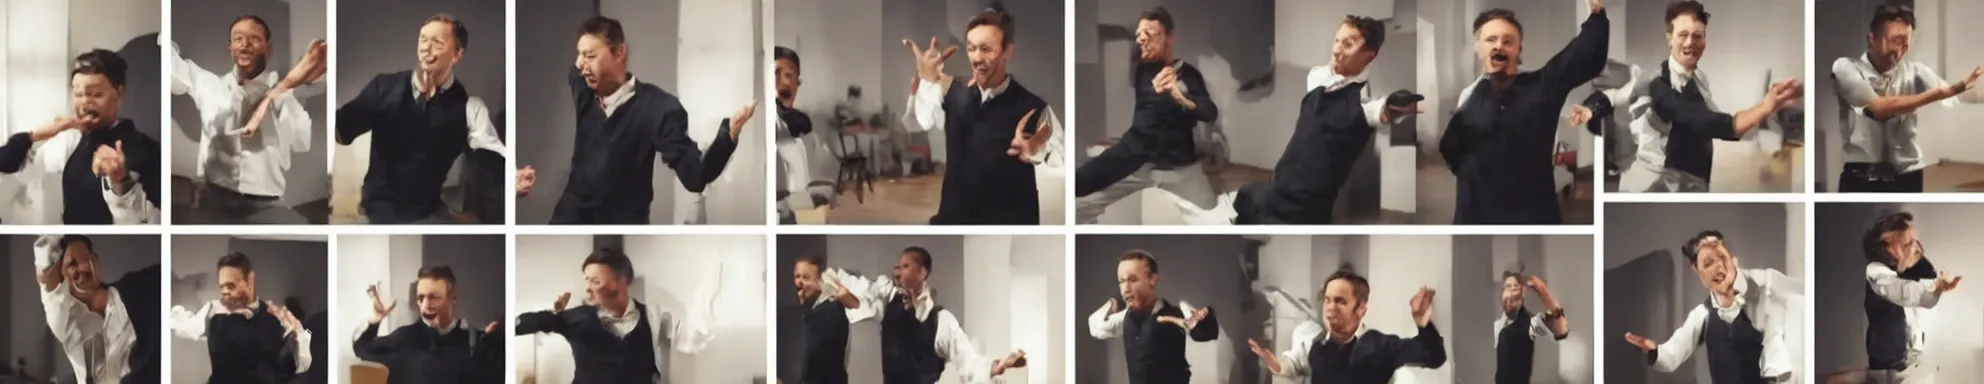 Image similar to 6 frames from a video of a man dancing